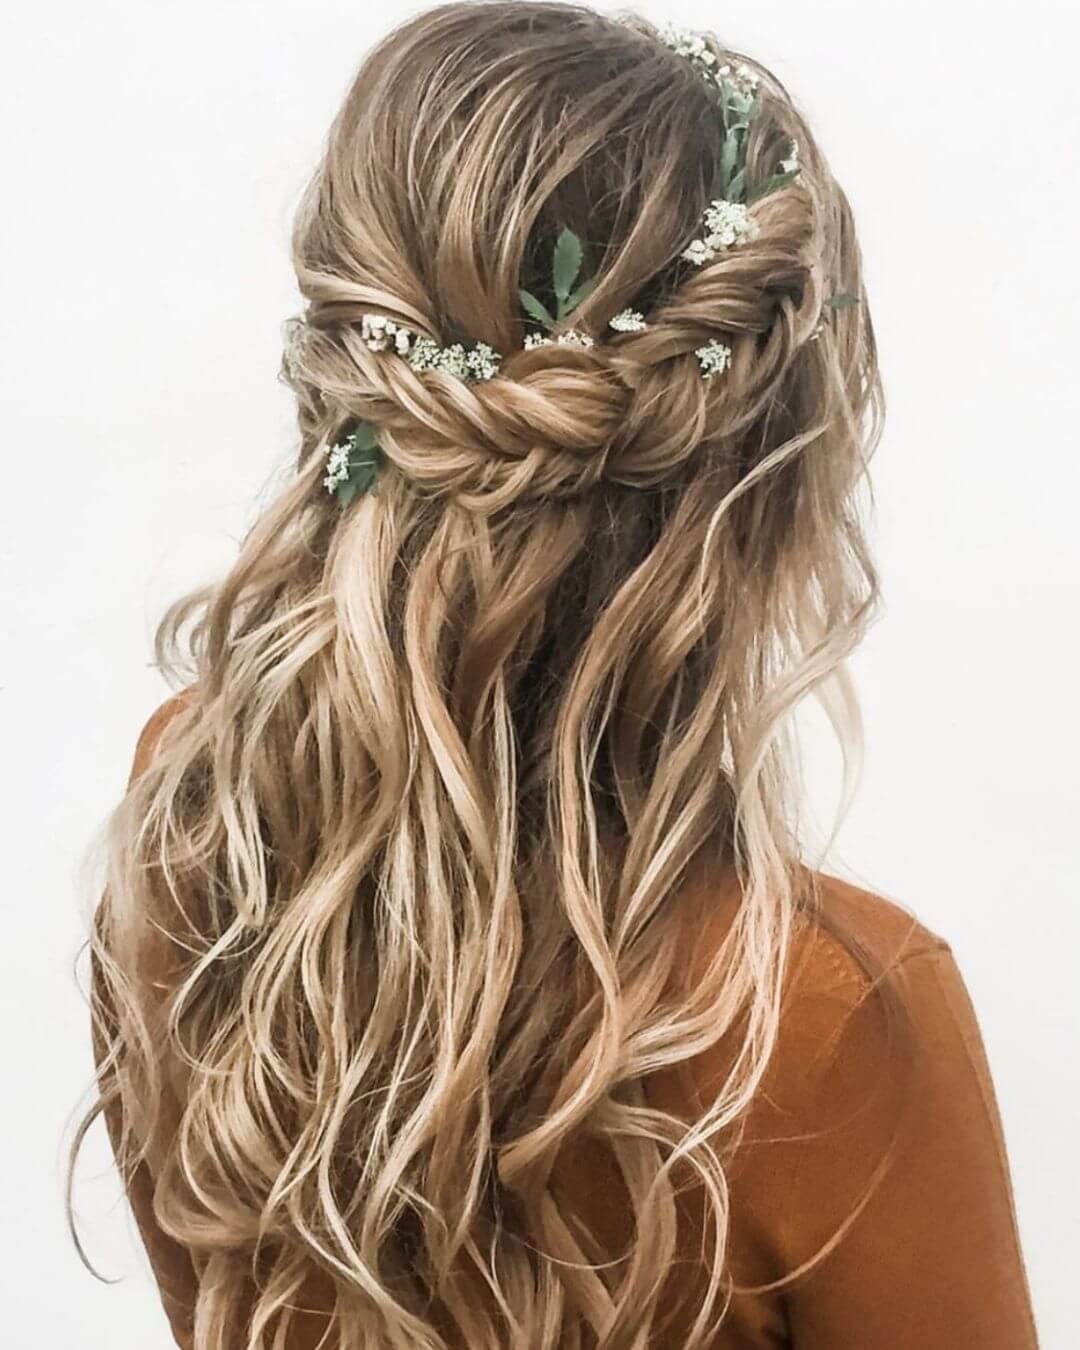 Christmas Inspired Hairstyles and Colors Half Up Fishtail Braid